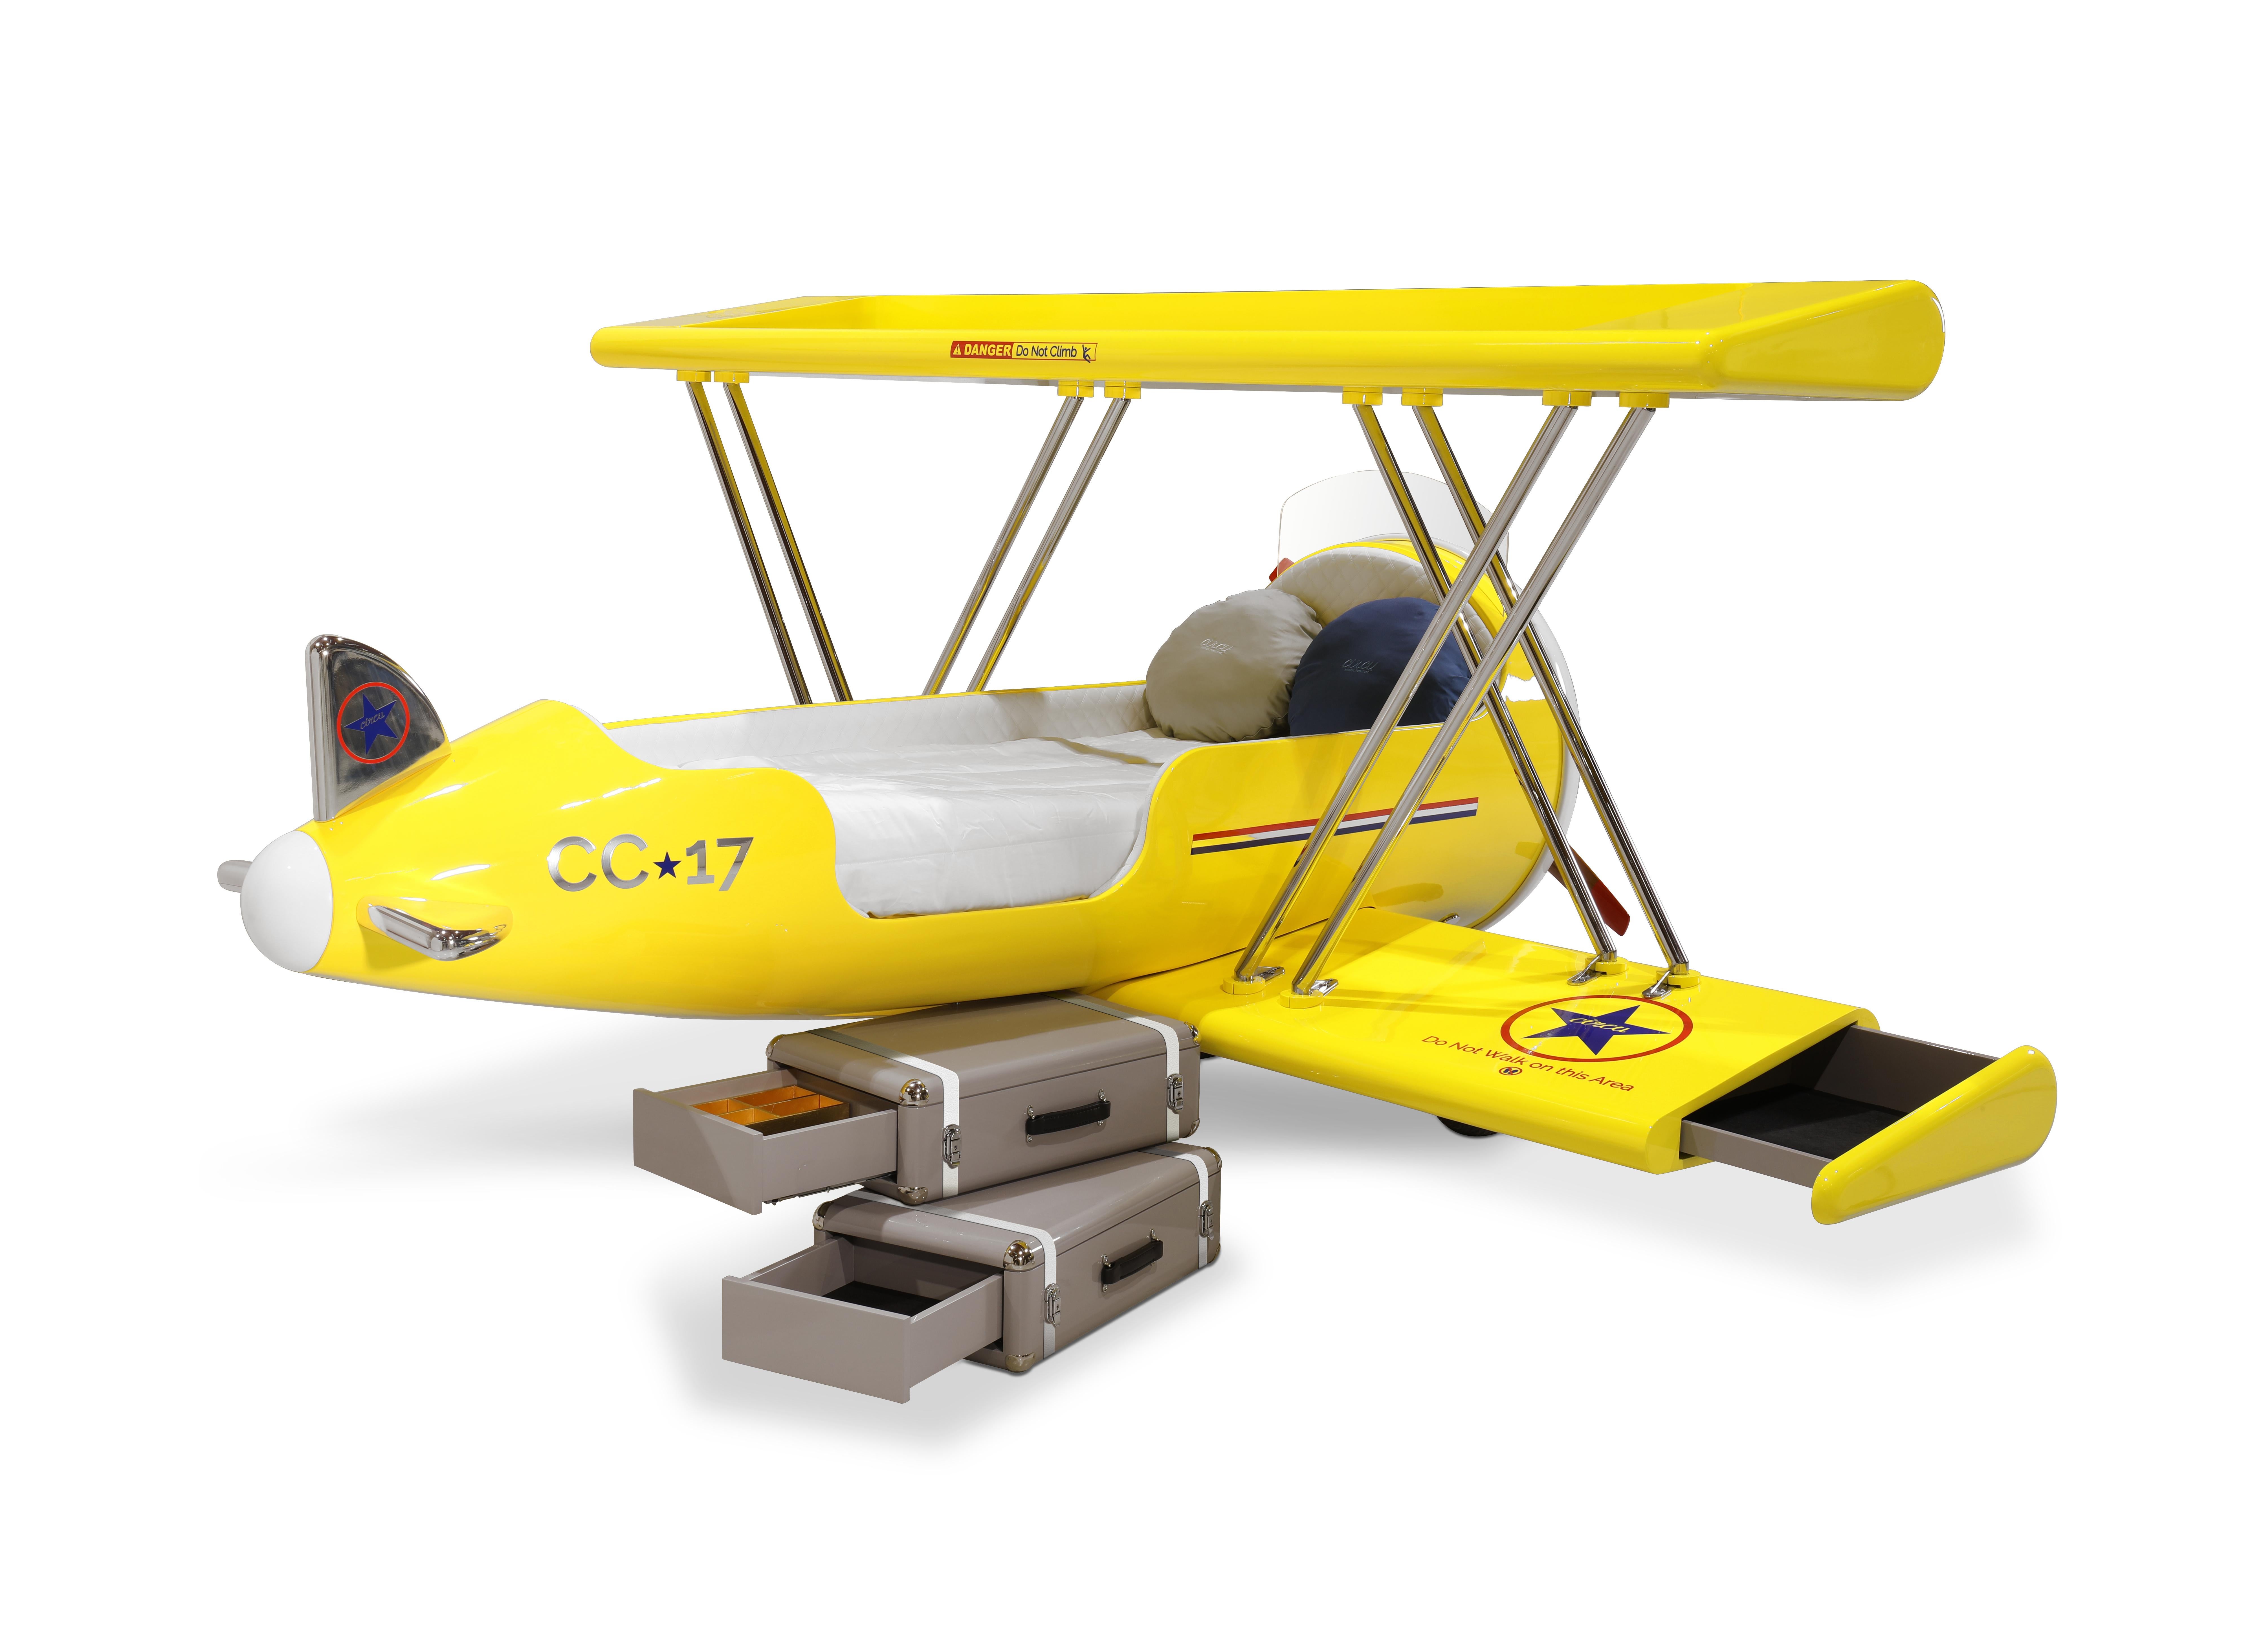 Portuguese Sky B Plane Kids Bed in shape of an airplane by Circu Magical Furniture For Sale